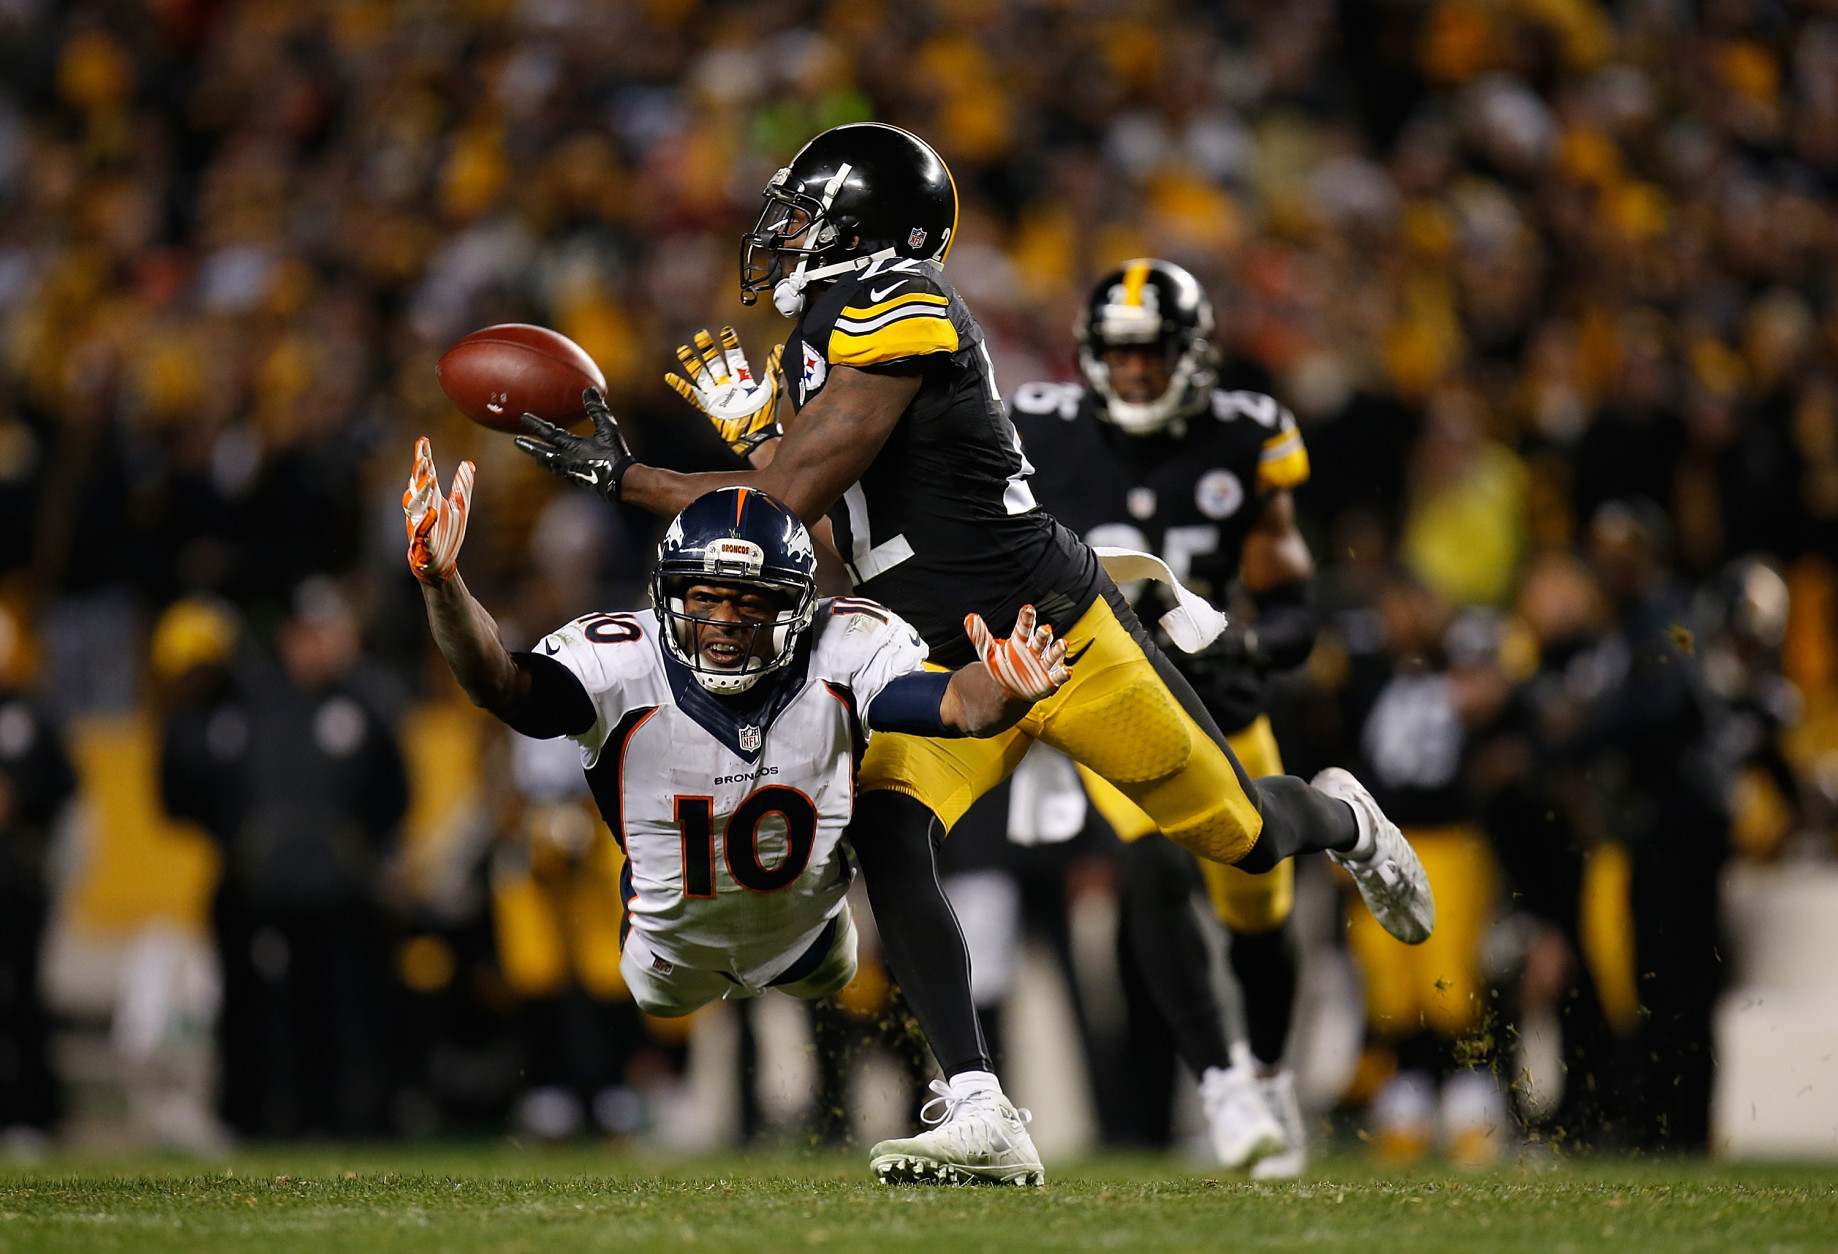 PITTSBURGH, PA - DECEMBER 20:  William Gay #22 of the Pittsburgh Steelers blocks a pass to Emmanuel Sanders #10 of the Denver Broncos in the fourth quarter of the game at Heinz Field on December 20, 2015 in Pittsburgh, Pennsylvania. (Photo by Gregory Shamus/Getty Images)